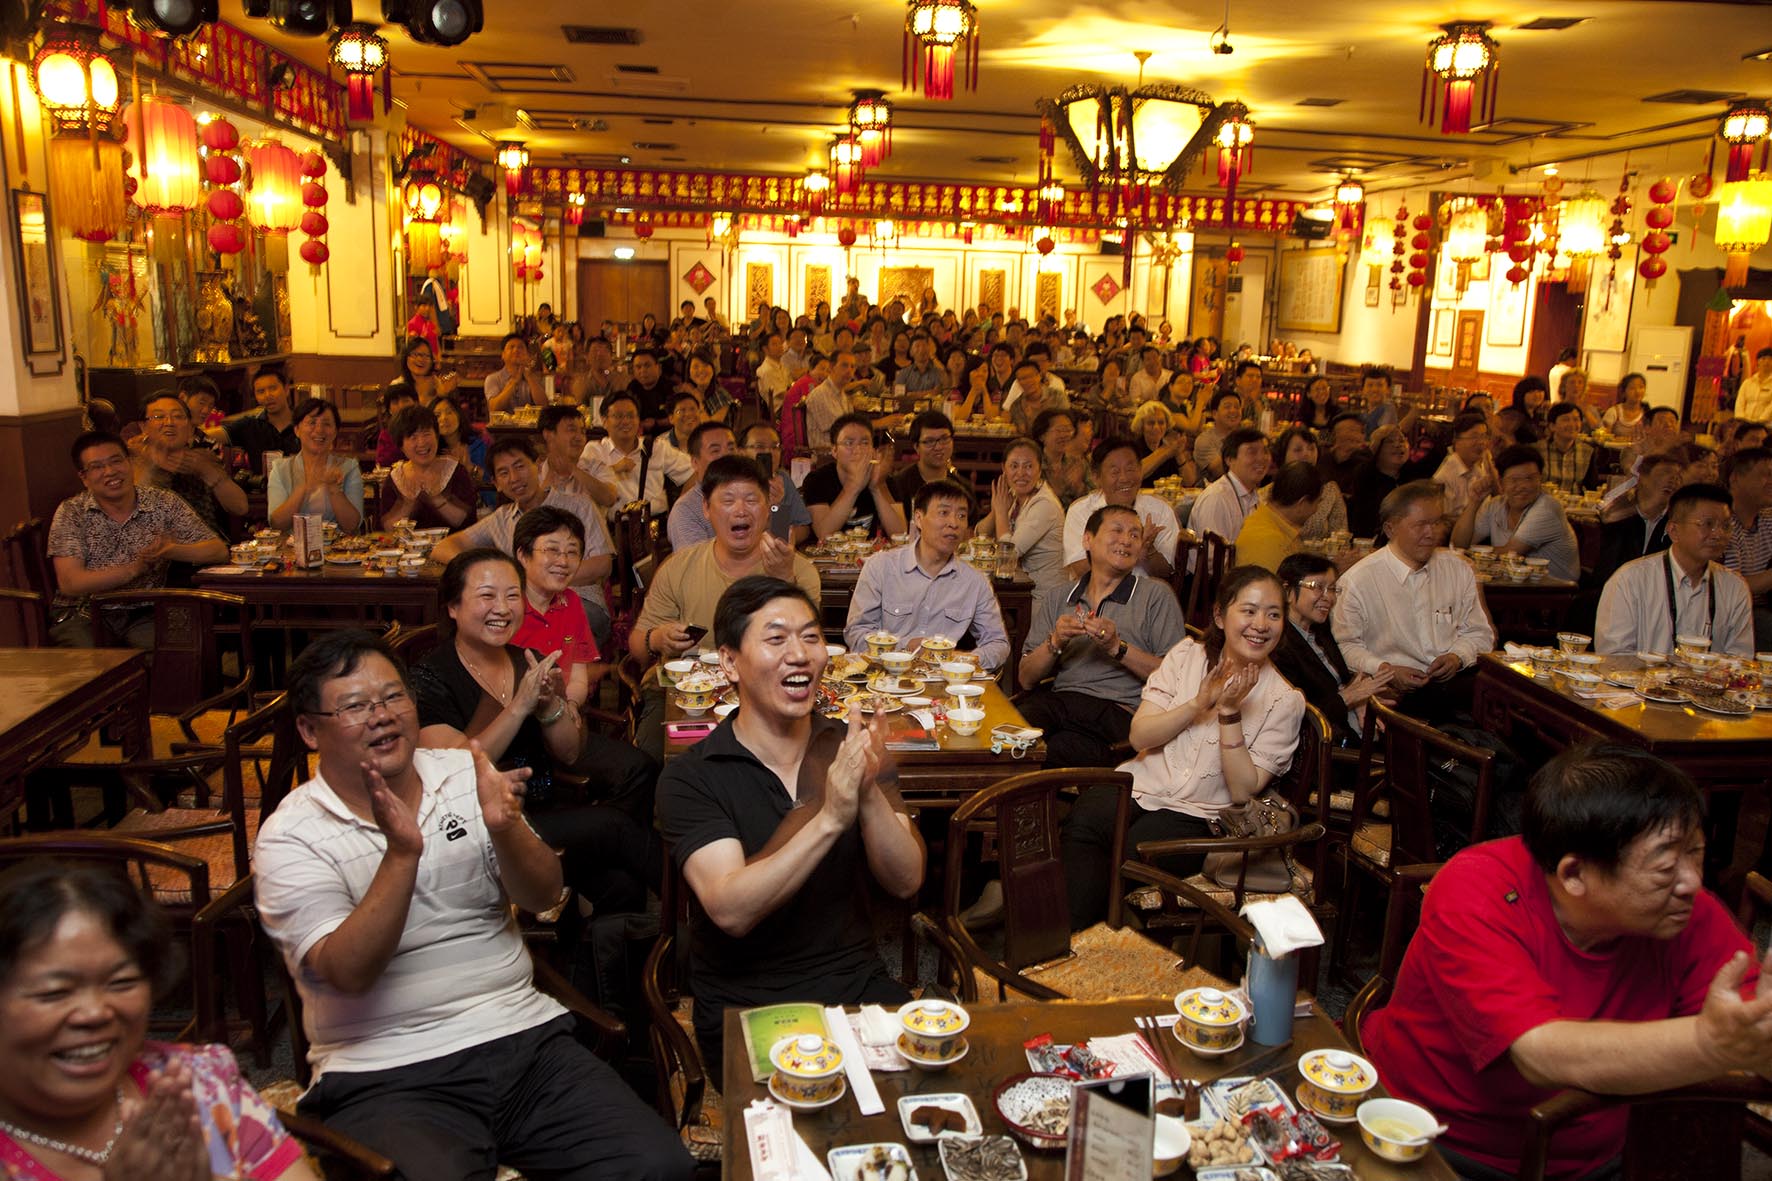  Customers sit enjoying the show, applauding and shouting at Laoshe teahouse 